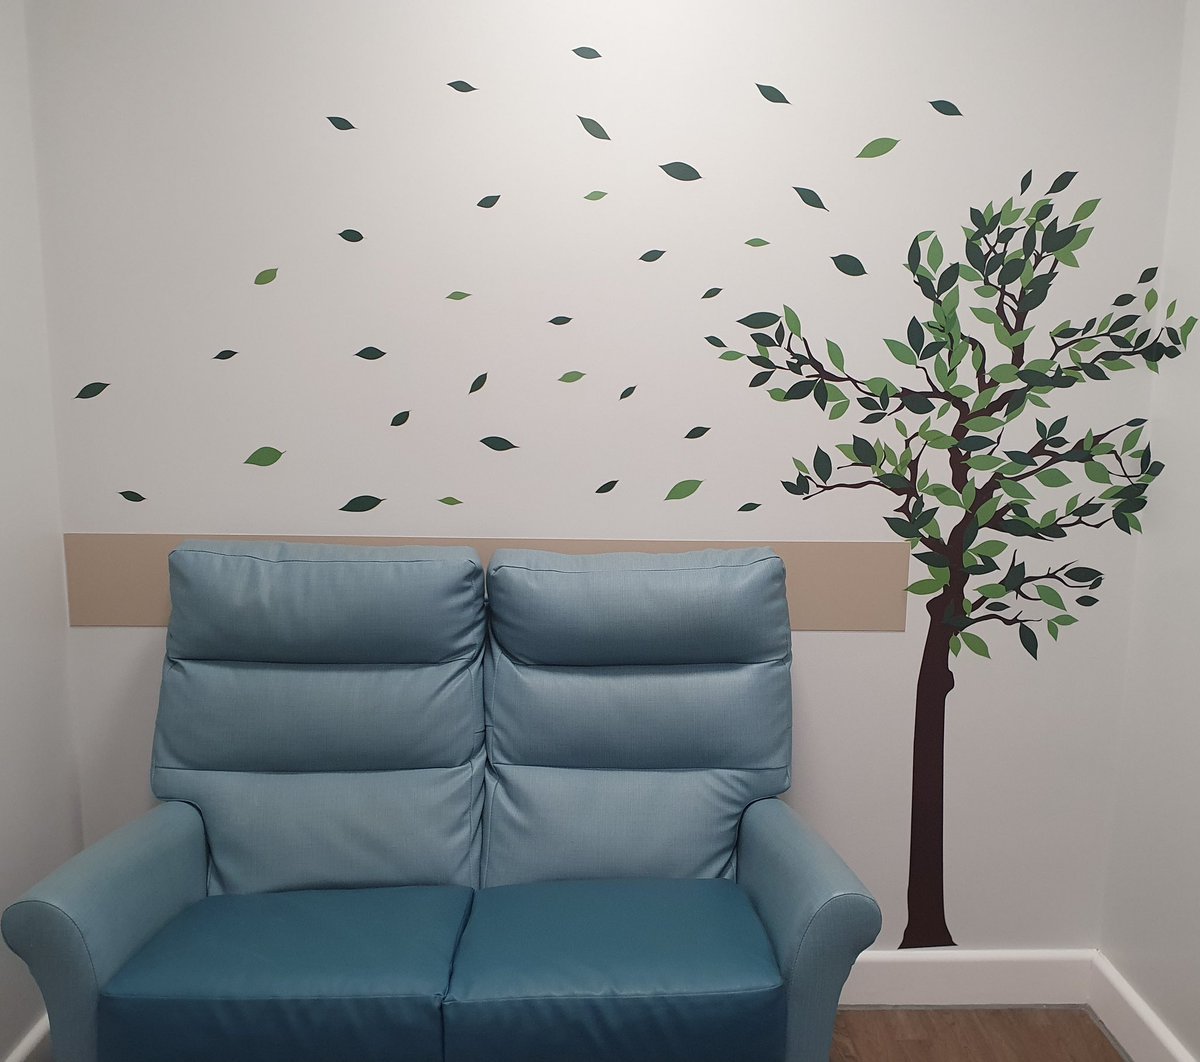 We are proud to introduce our discharge tree 🌳 which will be the first thing new patients see when they come onto the ward, the leaves will have written messages of positivity and advice written by our ladies on their day of discharge #watchthisspace #teamausten